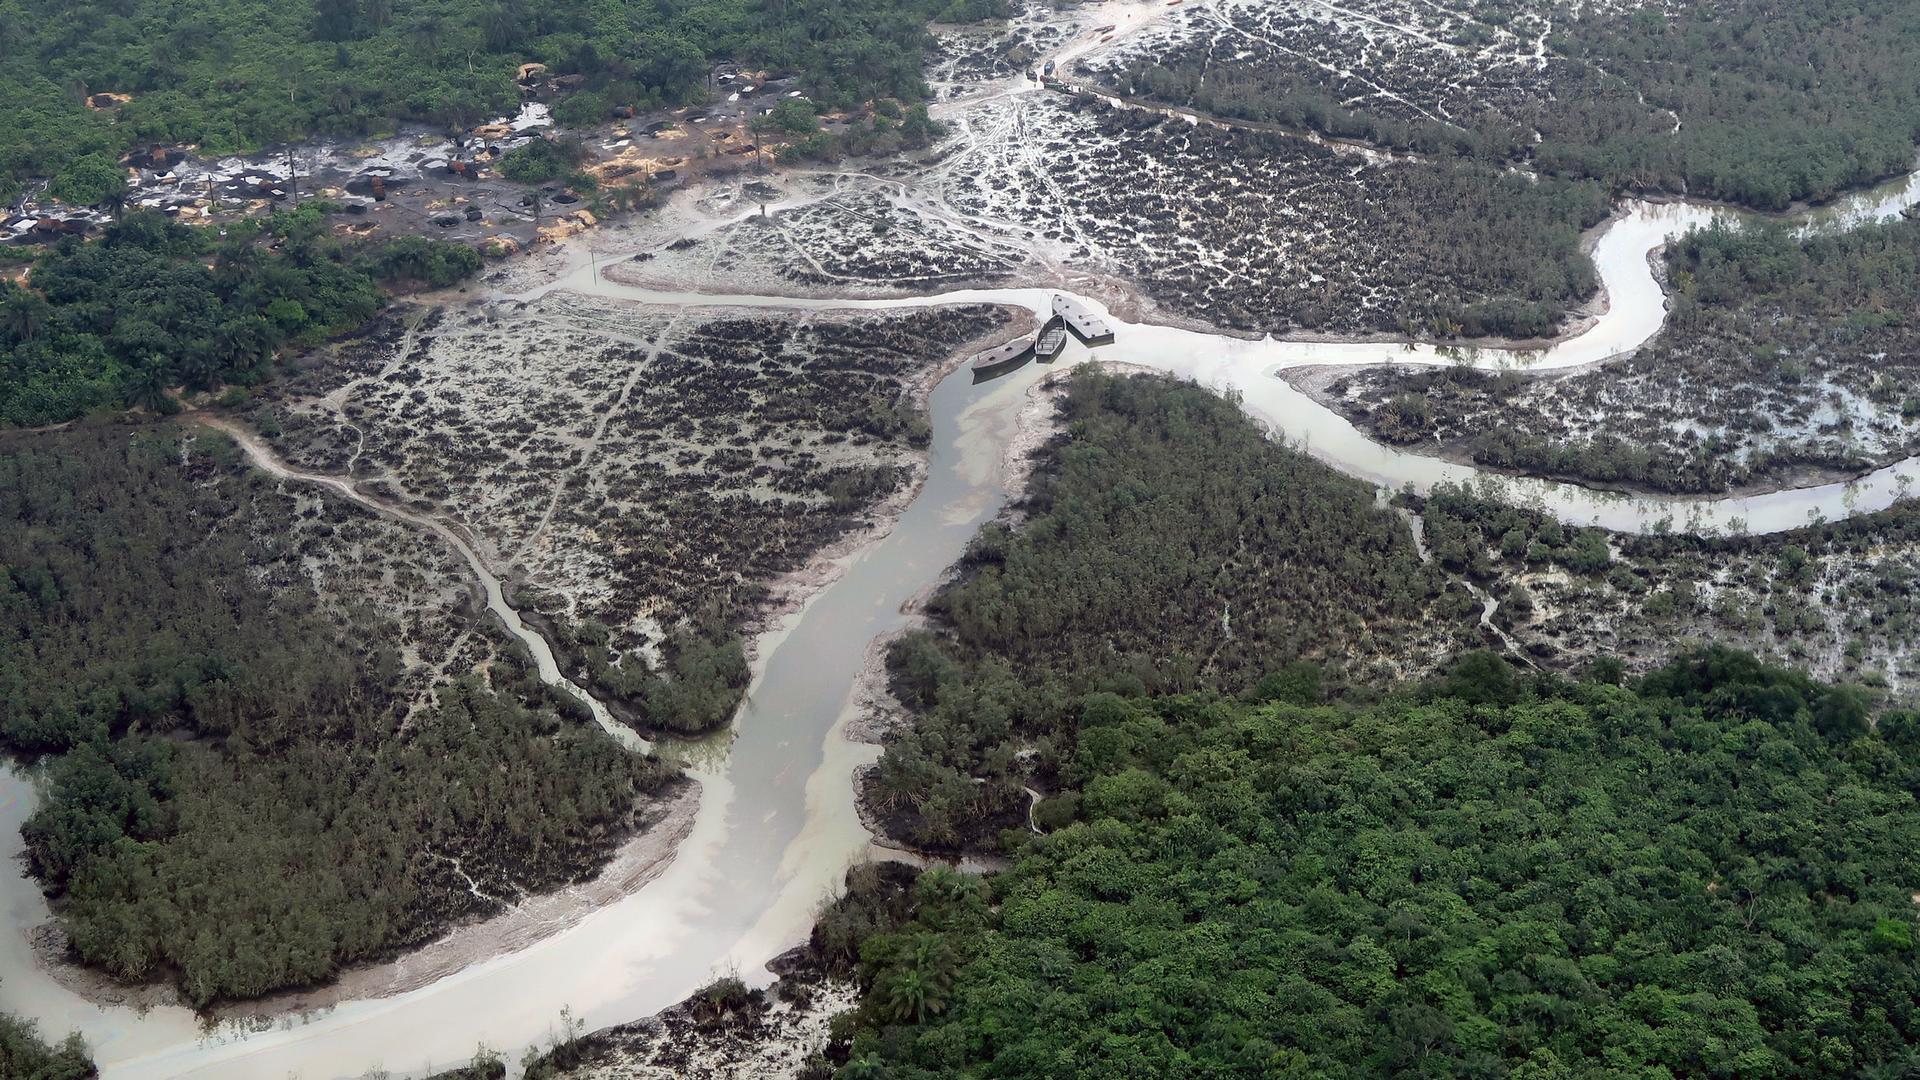 An aerial photo shows oil spills in a river delta